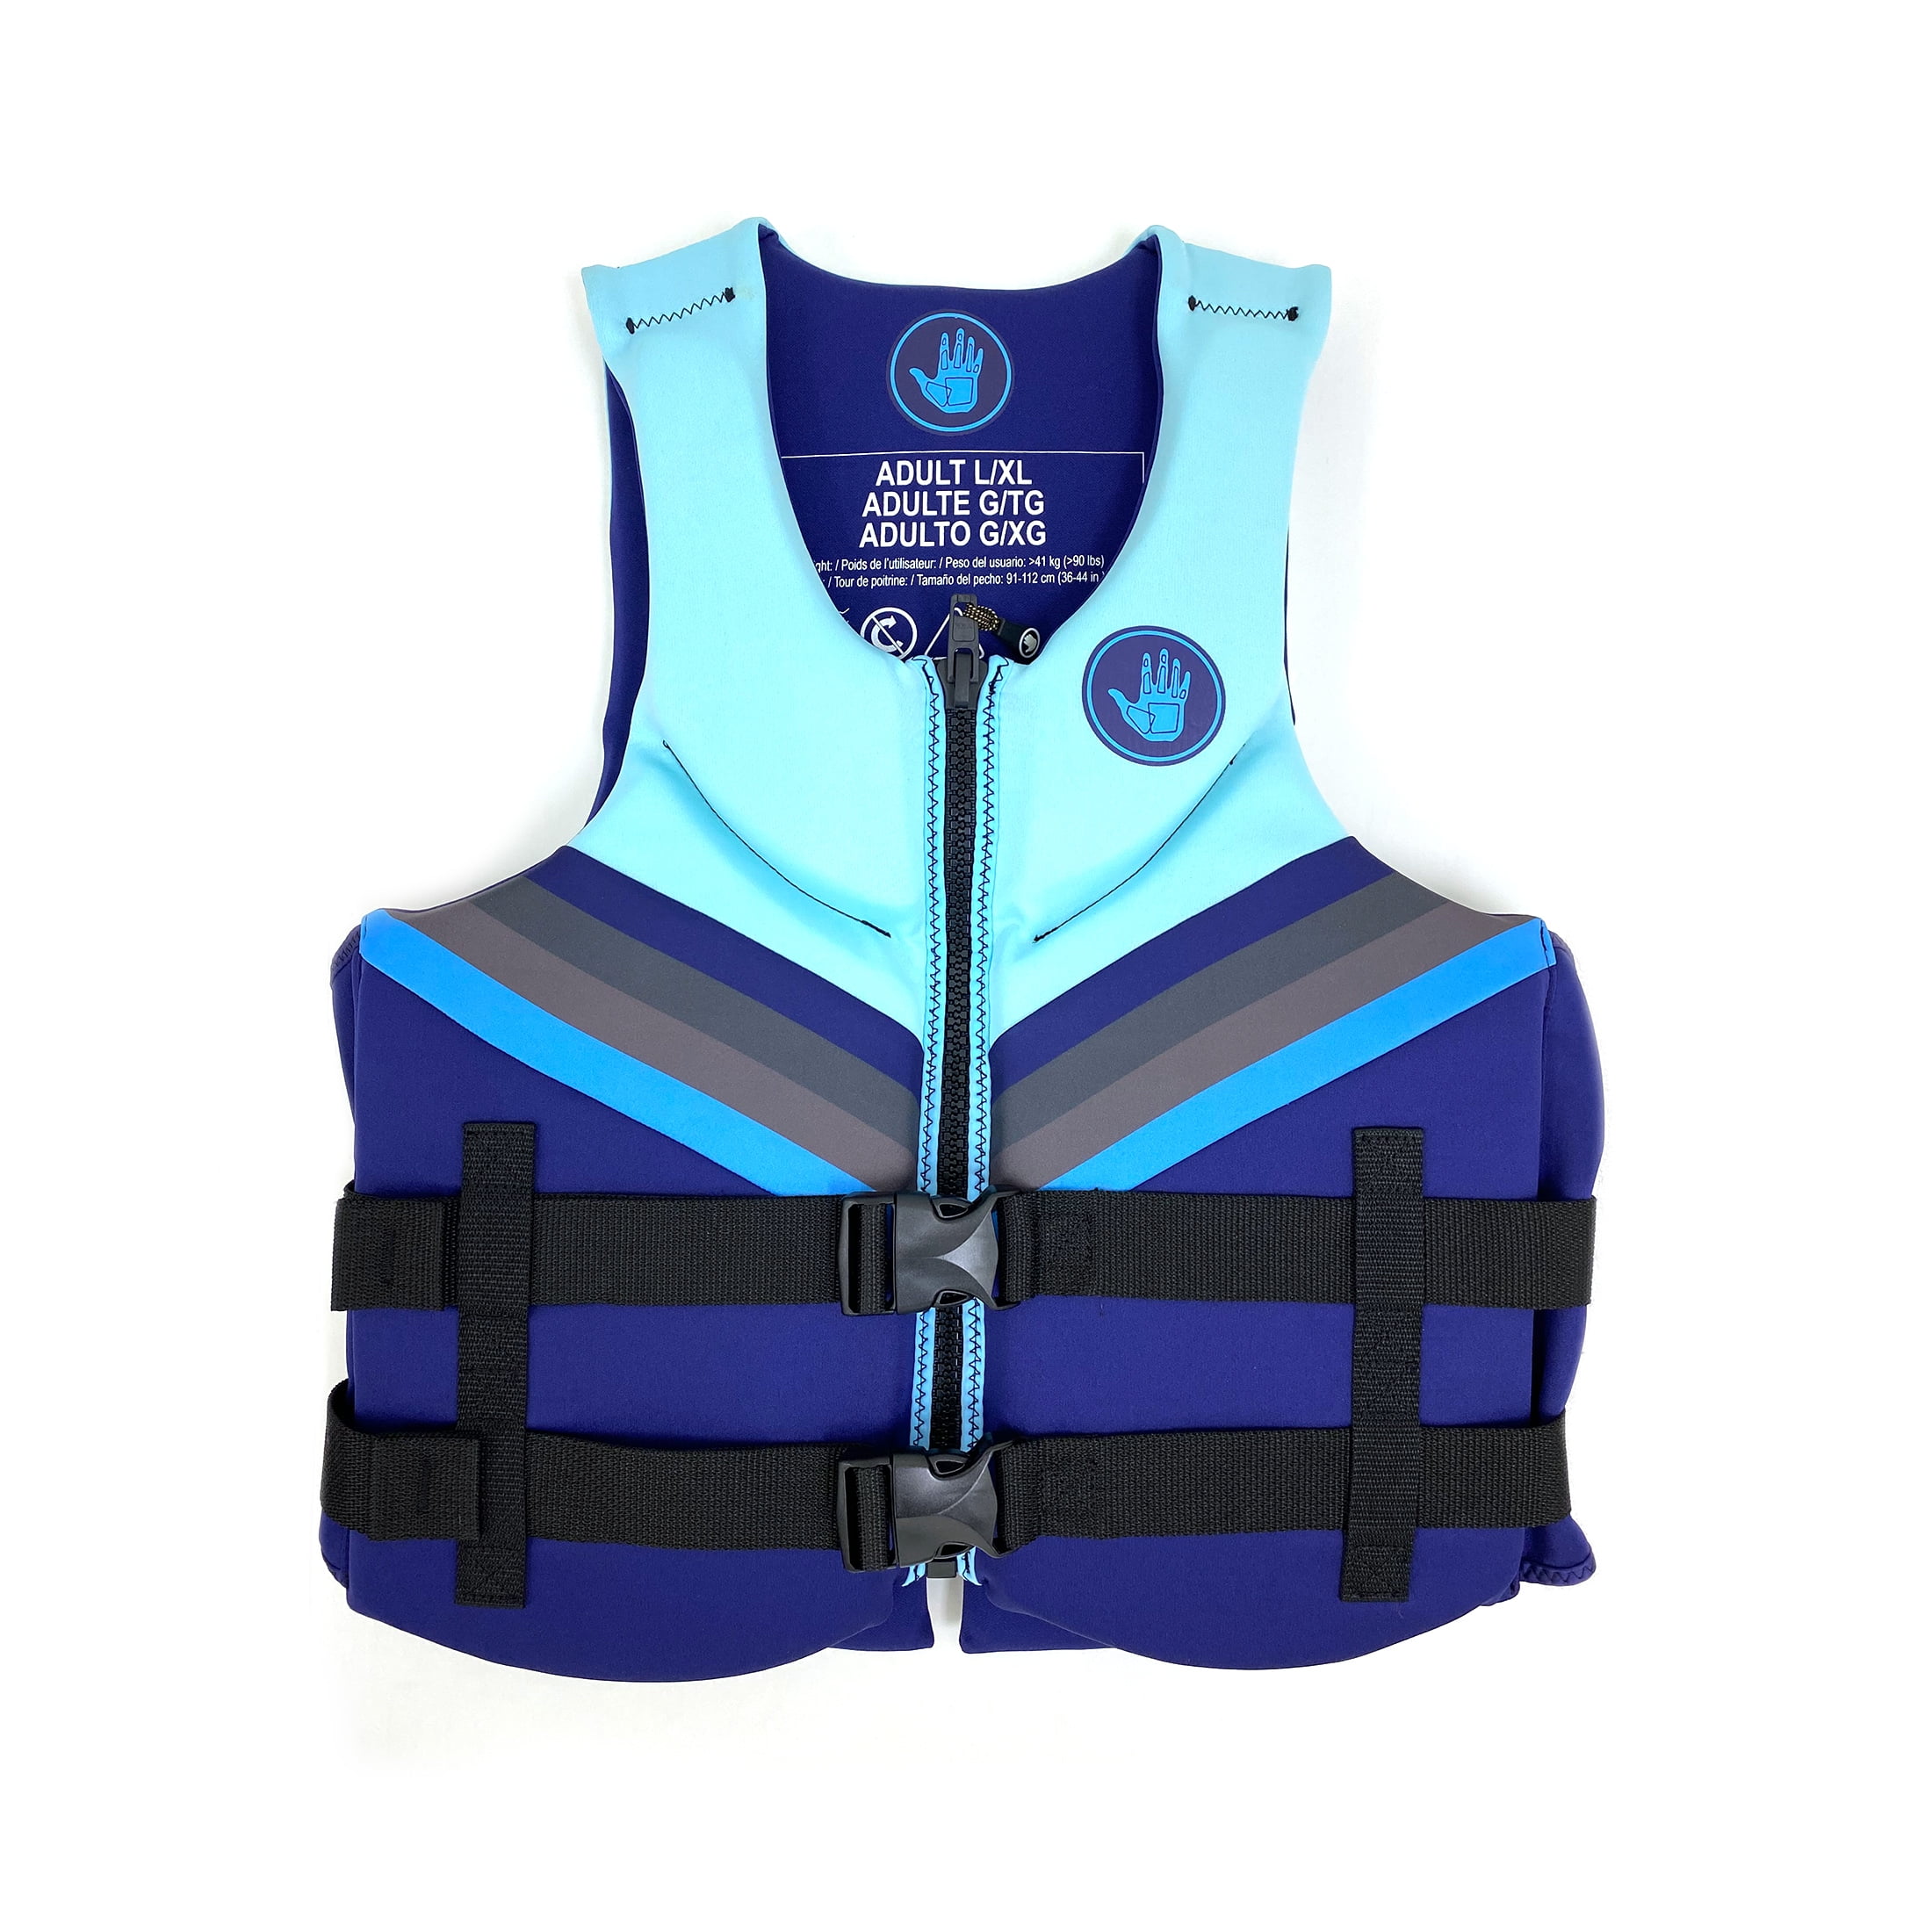 Details about   NEW X2O Universal Adult Life Jacket 2X/3X Blue WAKEBOARD GREAT FOR SKIING 